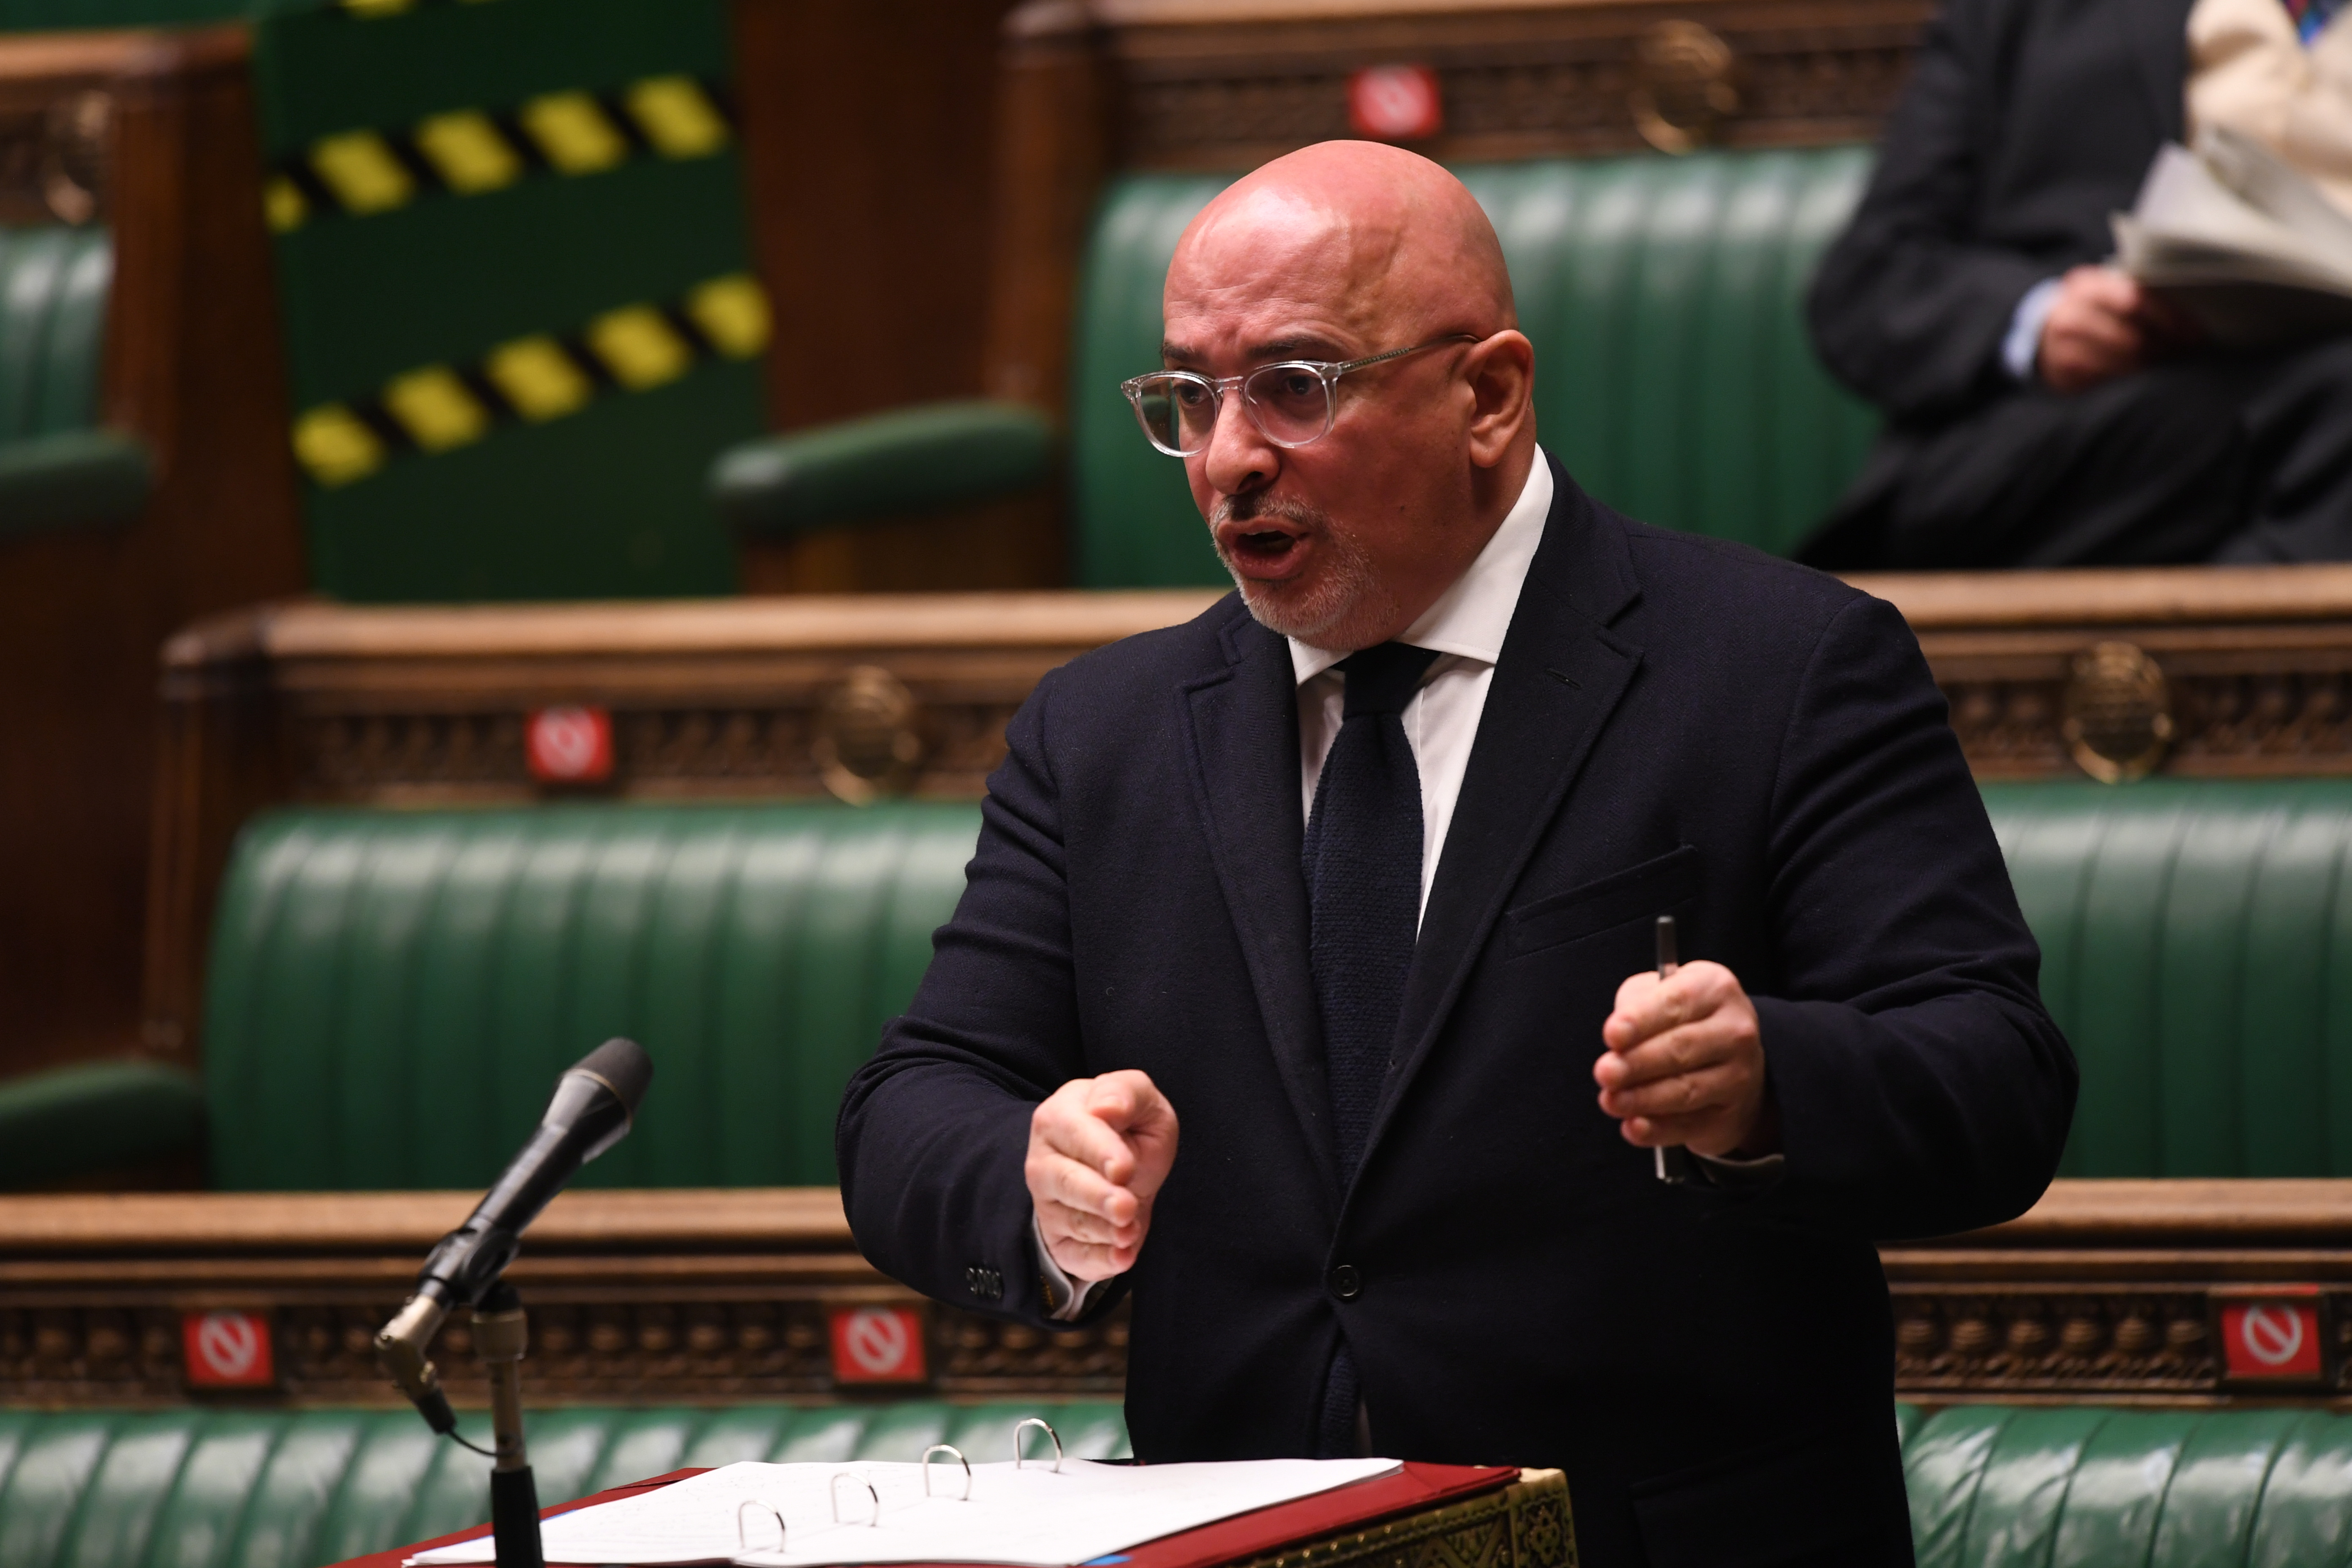 Minister for COVID Vaccine Deployment Nadhim Zahawi speaks at the House of Commons in London